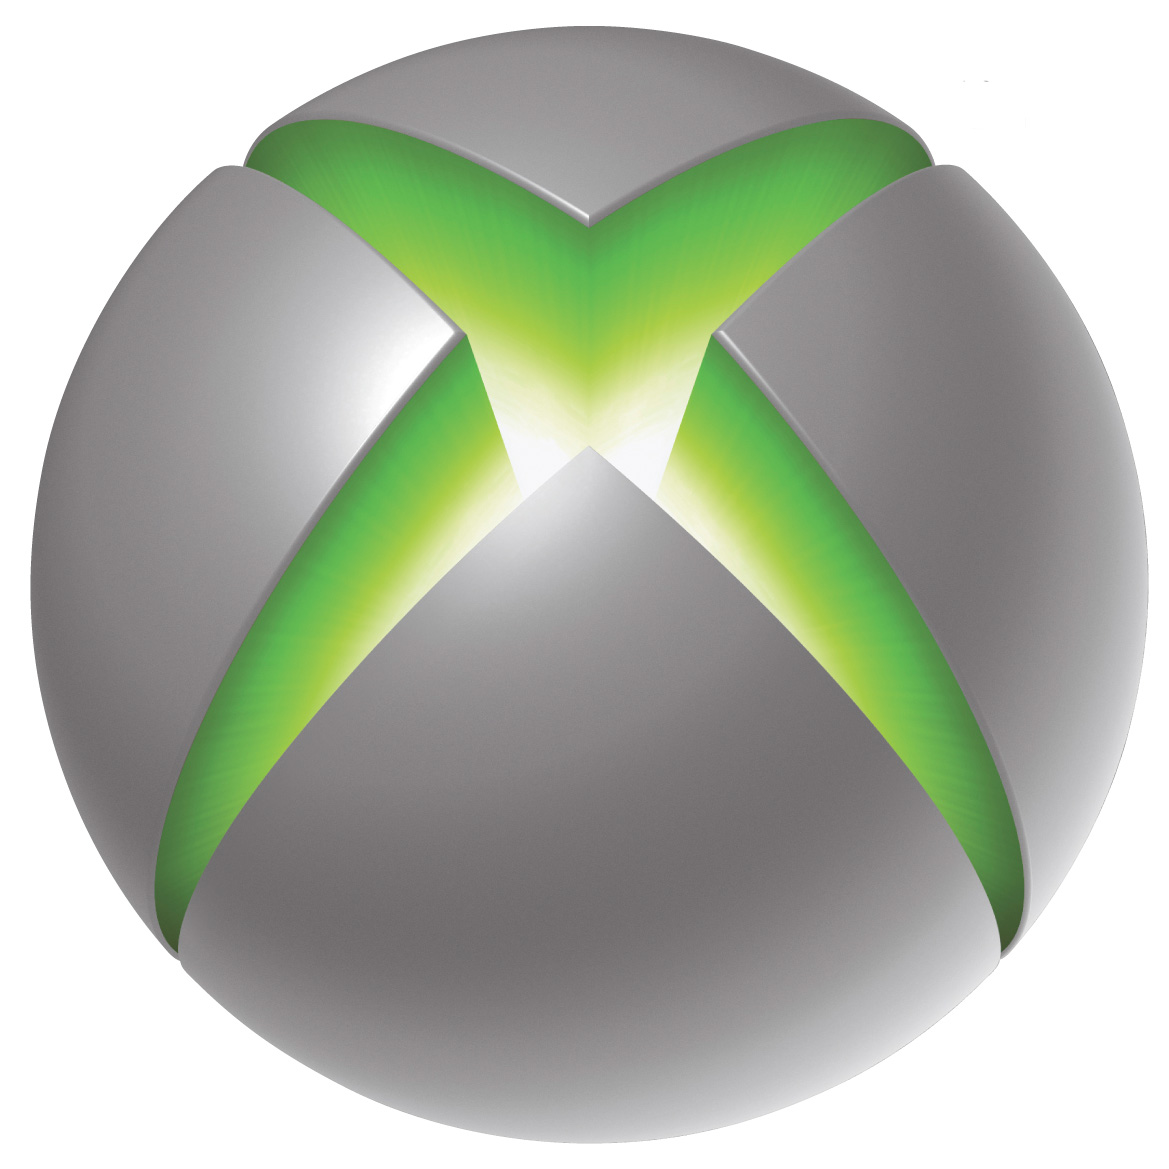 The Second Generation of Xbox Live